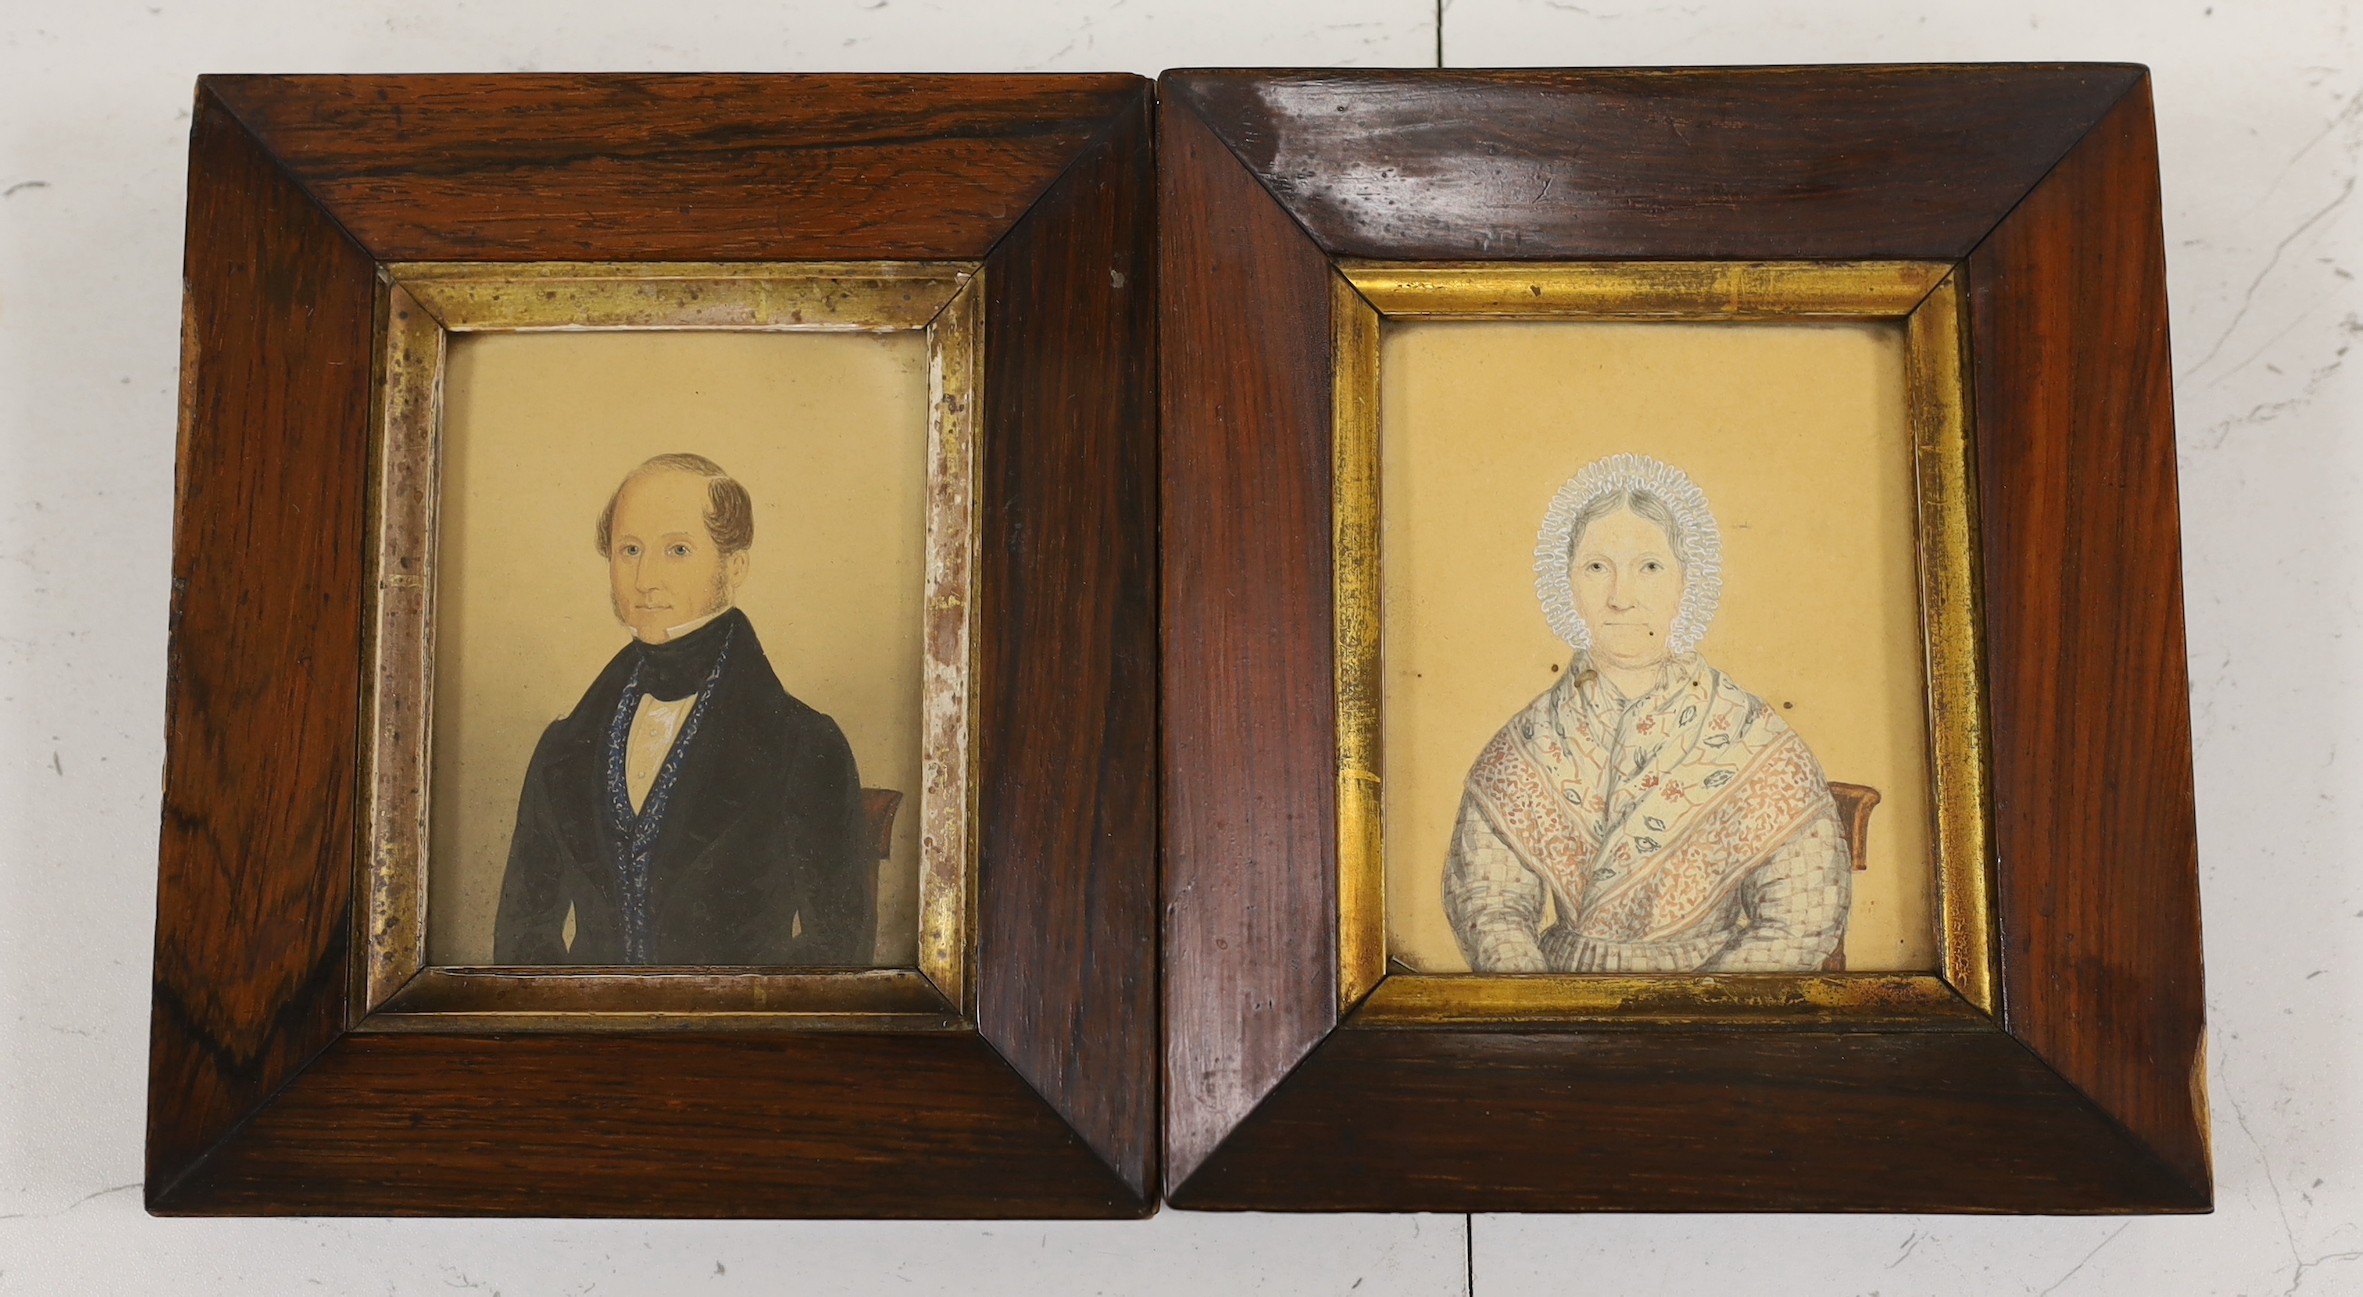 English School, mid 19th century, pair of watercolour miniatures, A Lady and A Gentleman, in rosewood frames, 10 x 8.5cm